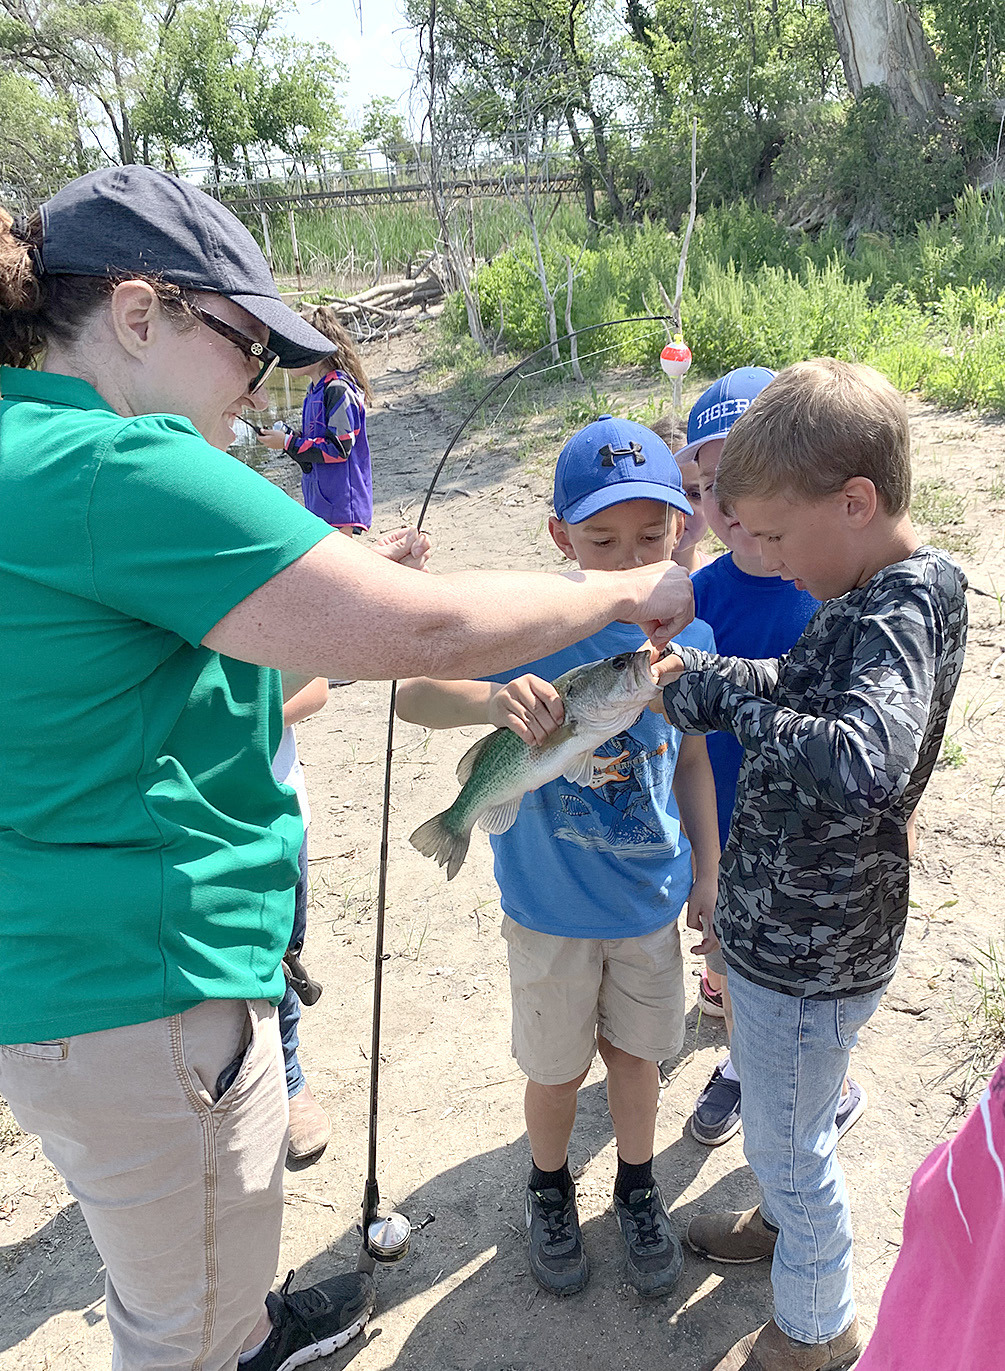 PHILLIPS-ROOKS DISTRICT AGENT CINDYWALKER shows the boys how to unhook a fish during Outdoor Adventure Day.